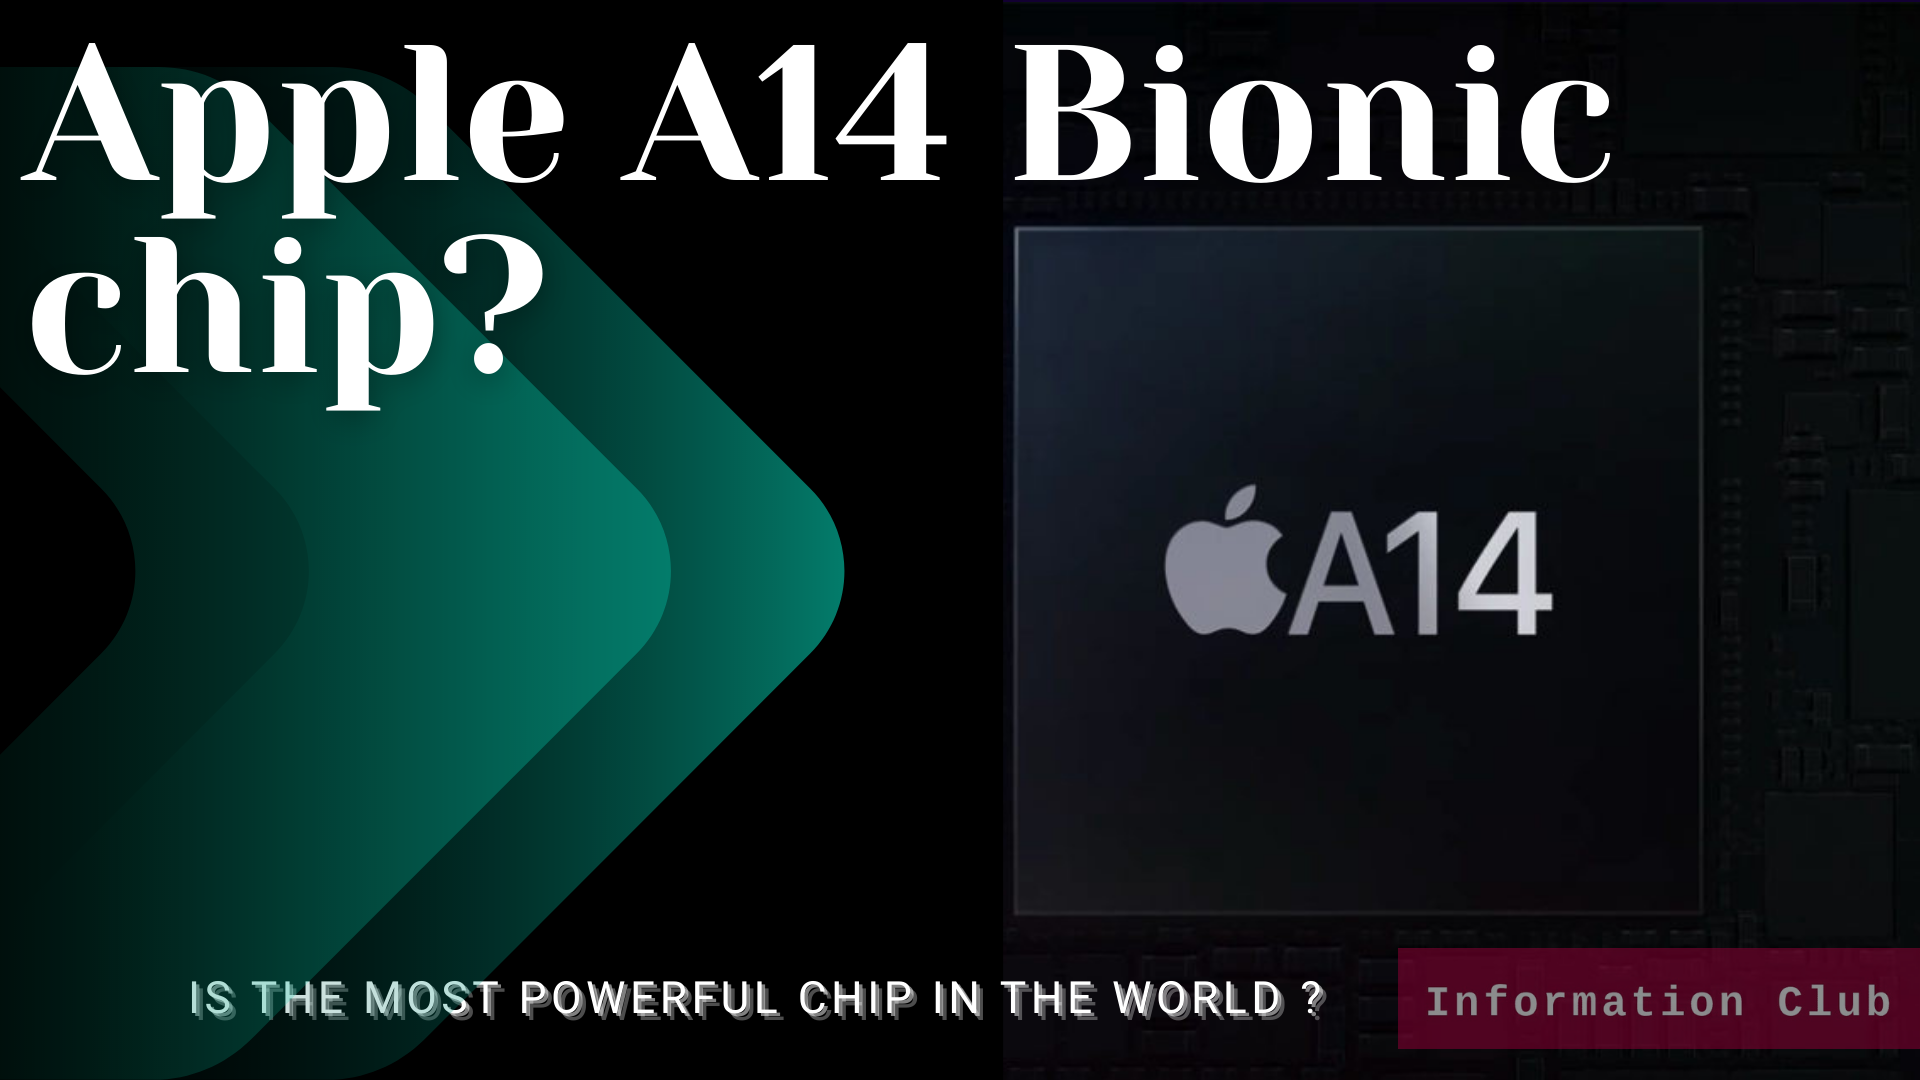 https://www.clubinfonline.com/2020/10/23/a14-bionic-chip-is-the-most-powerful-chip-ever/